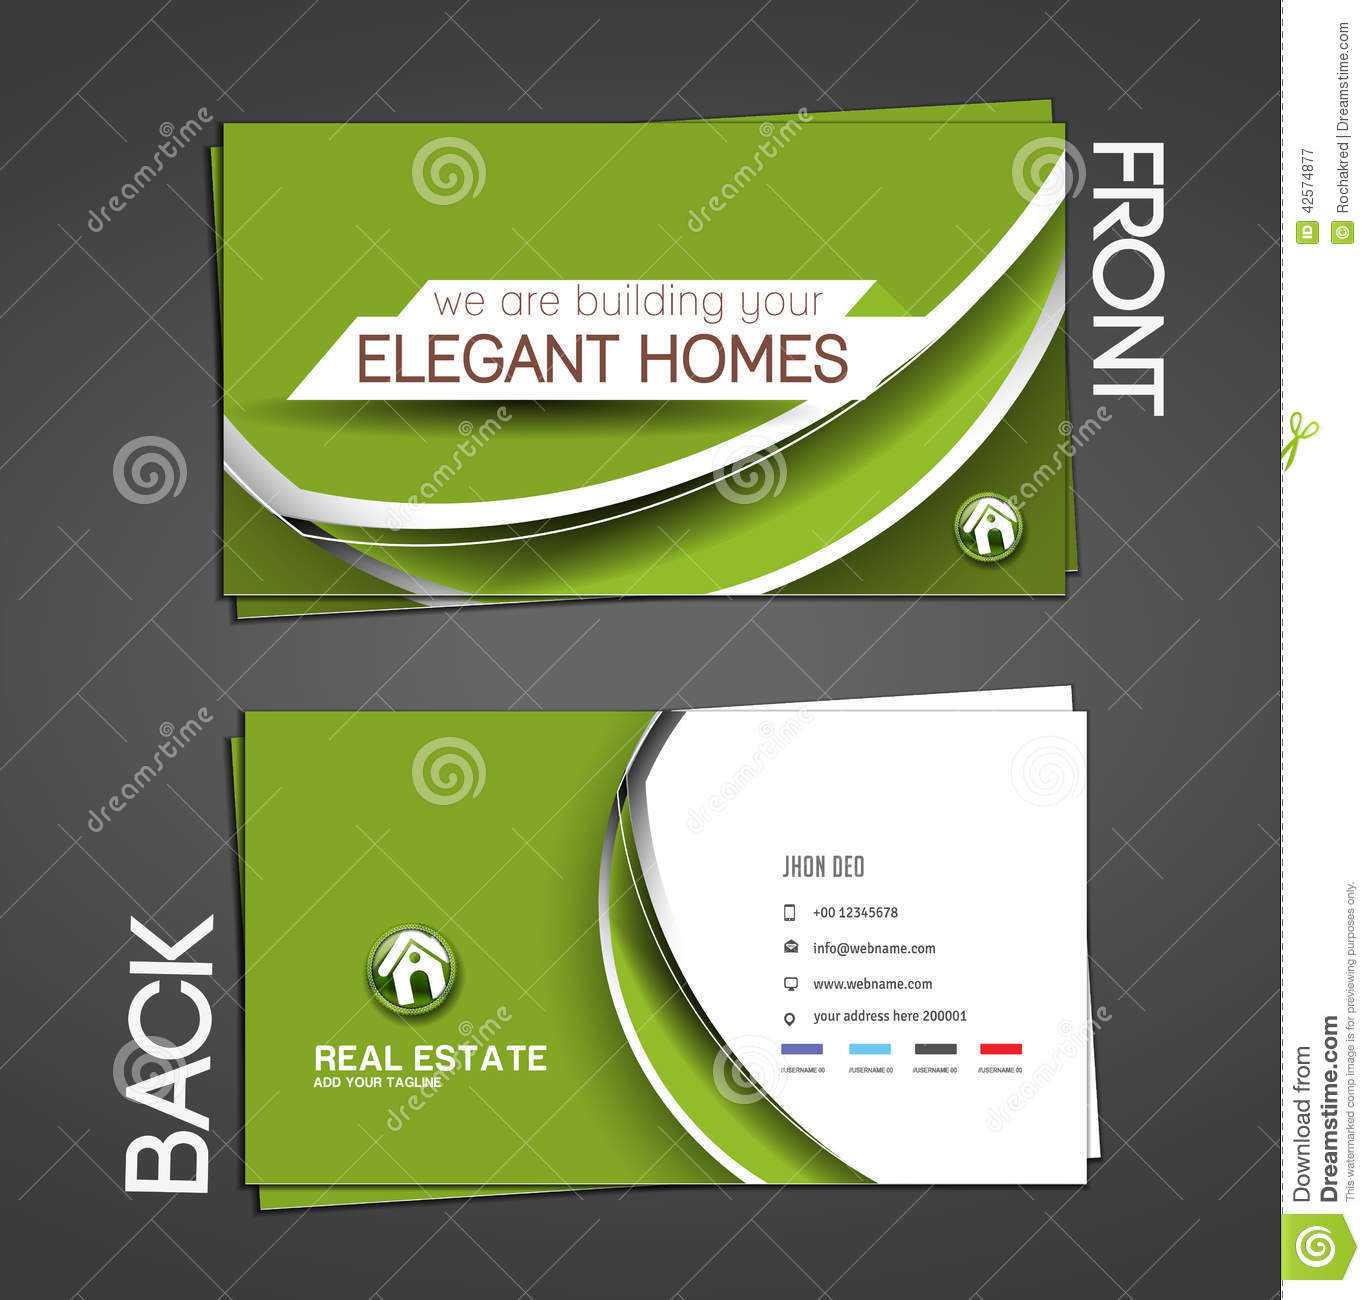 Real Estate Agent Business Card Stock Vector – Illustration Intended For Real Estate Agent Business Card Template